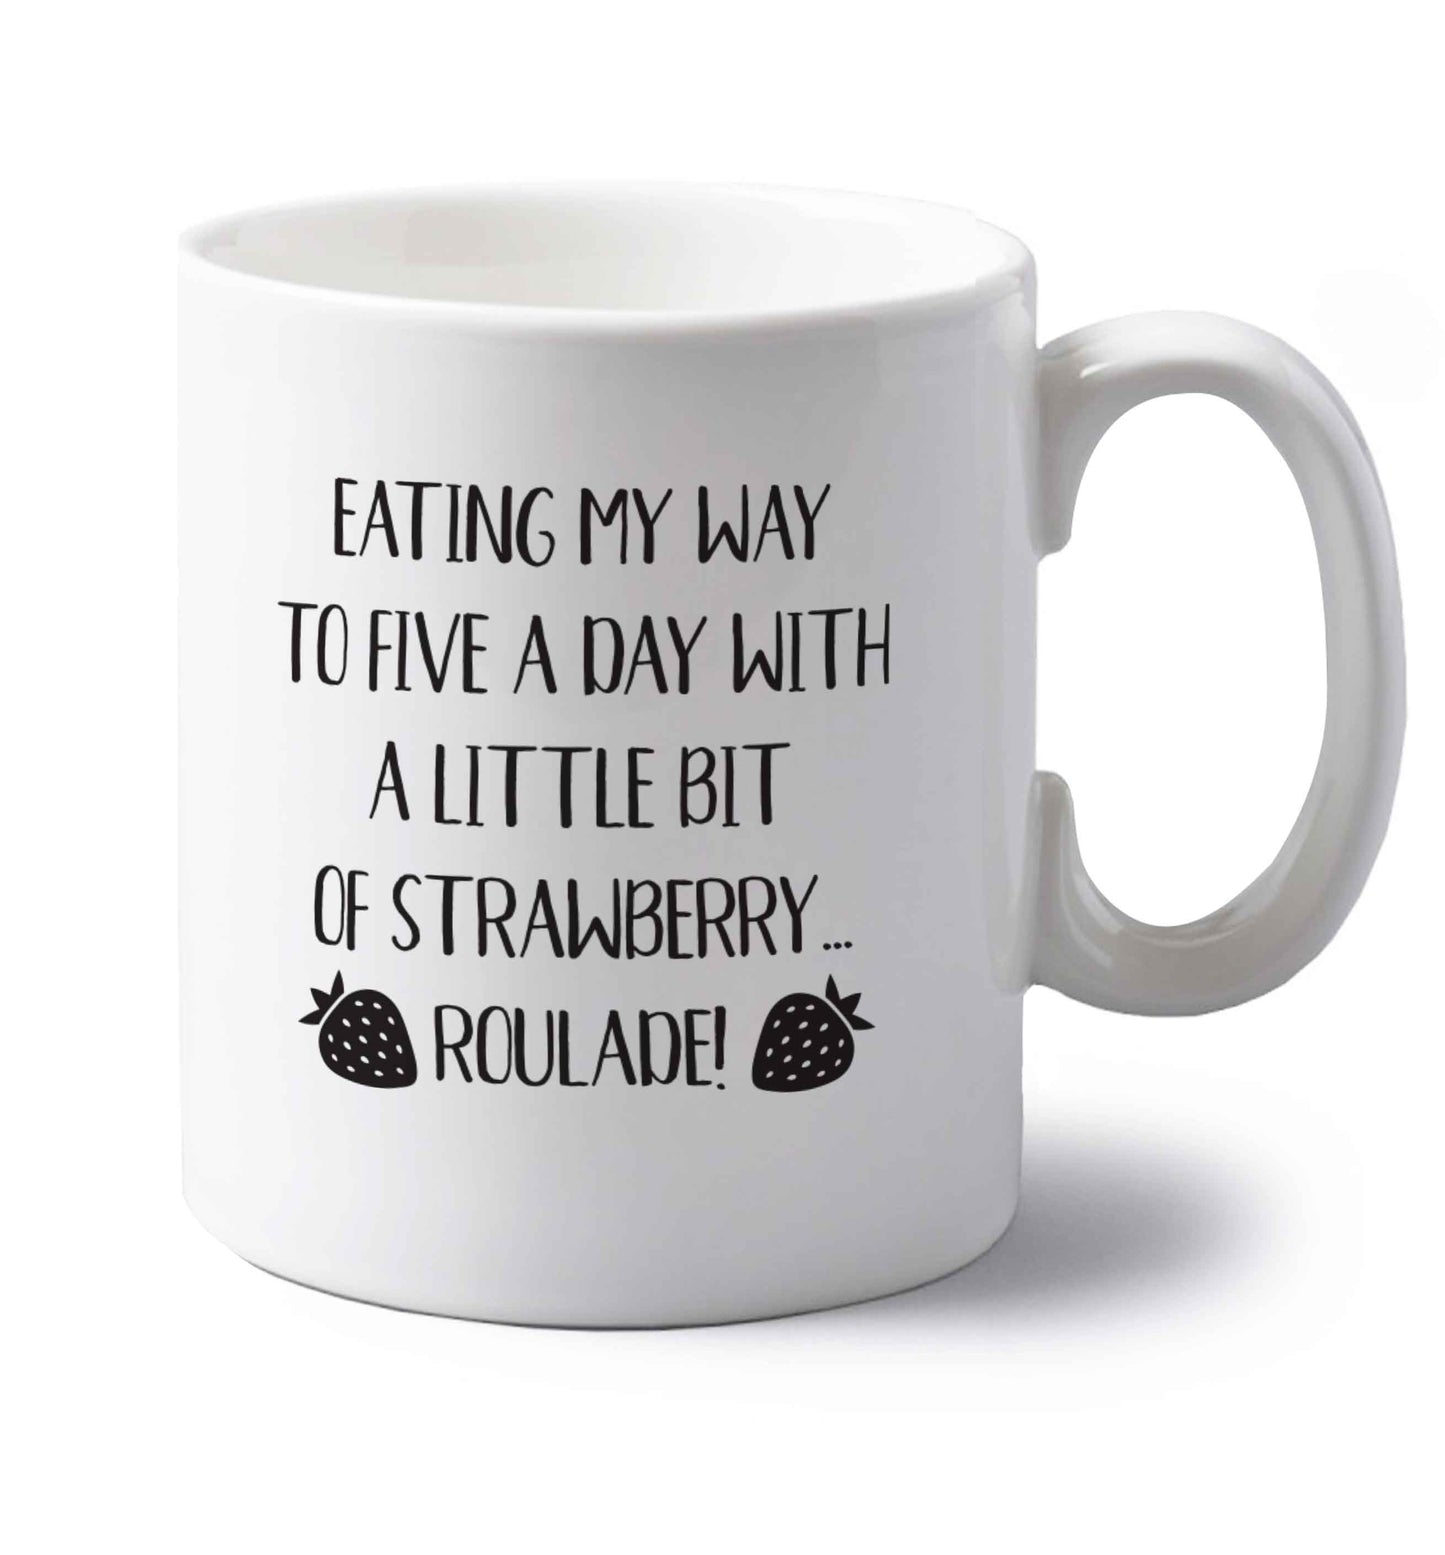 Eating my way to five a day with a little bit of strawberry roulade left handed white ceramic mug 